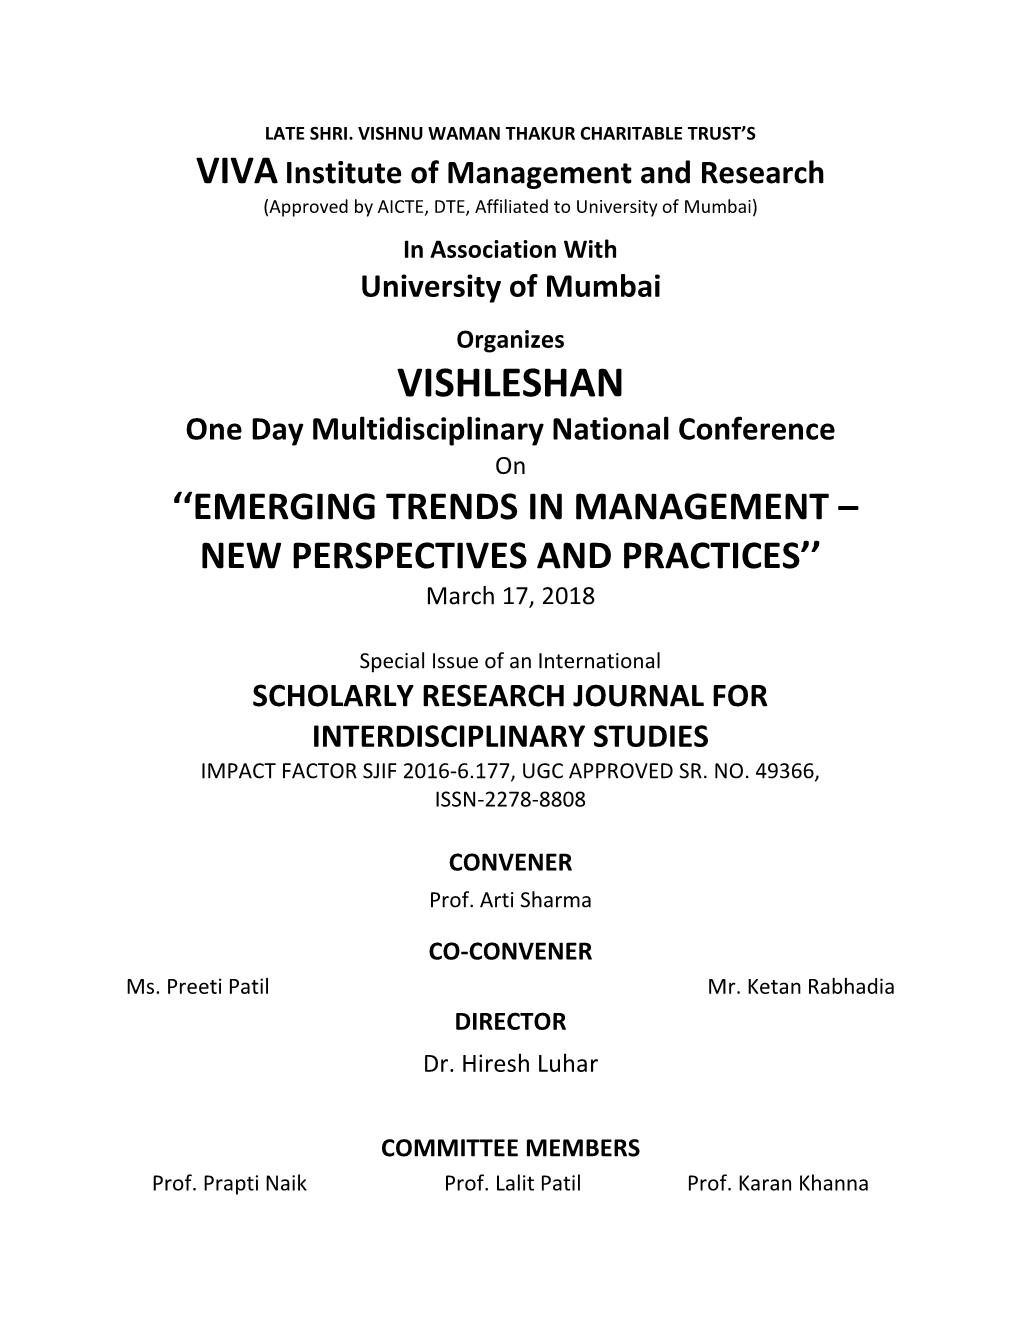 VISHLESHAN One Day Multidisciplinary National Conference on ‘‘EMERGING TRENDS in MANAGEMENT – NEW PERSPECTIVES and PRACTICES’’ March 17, 2018